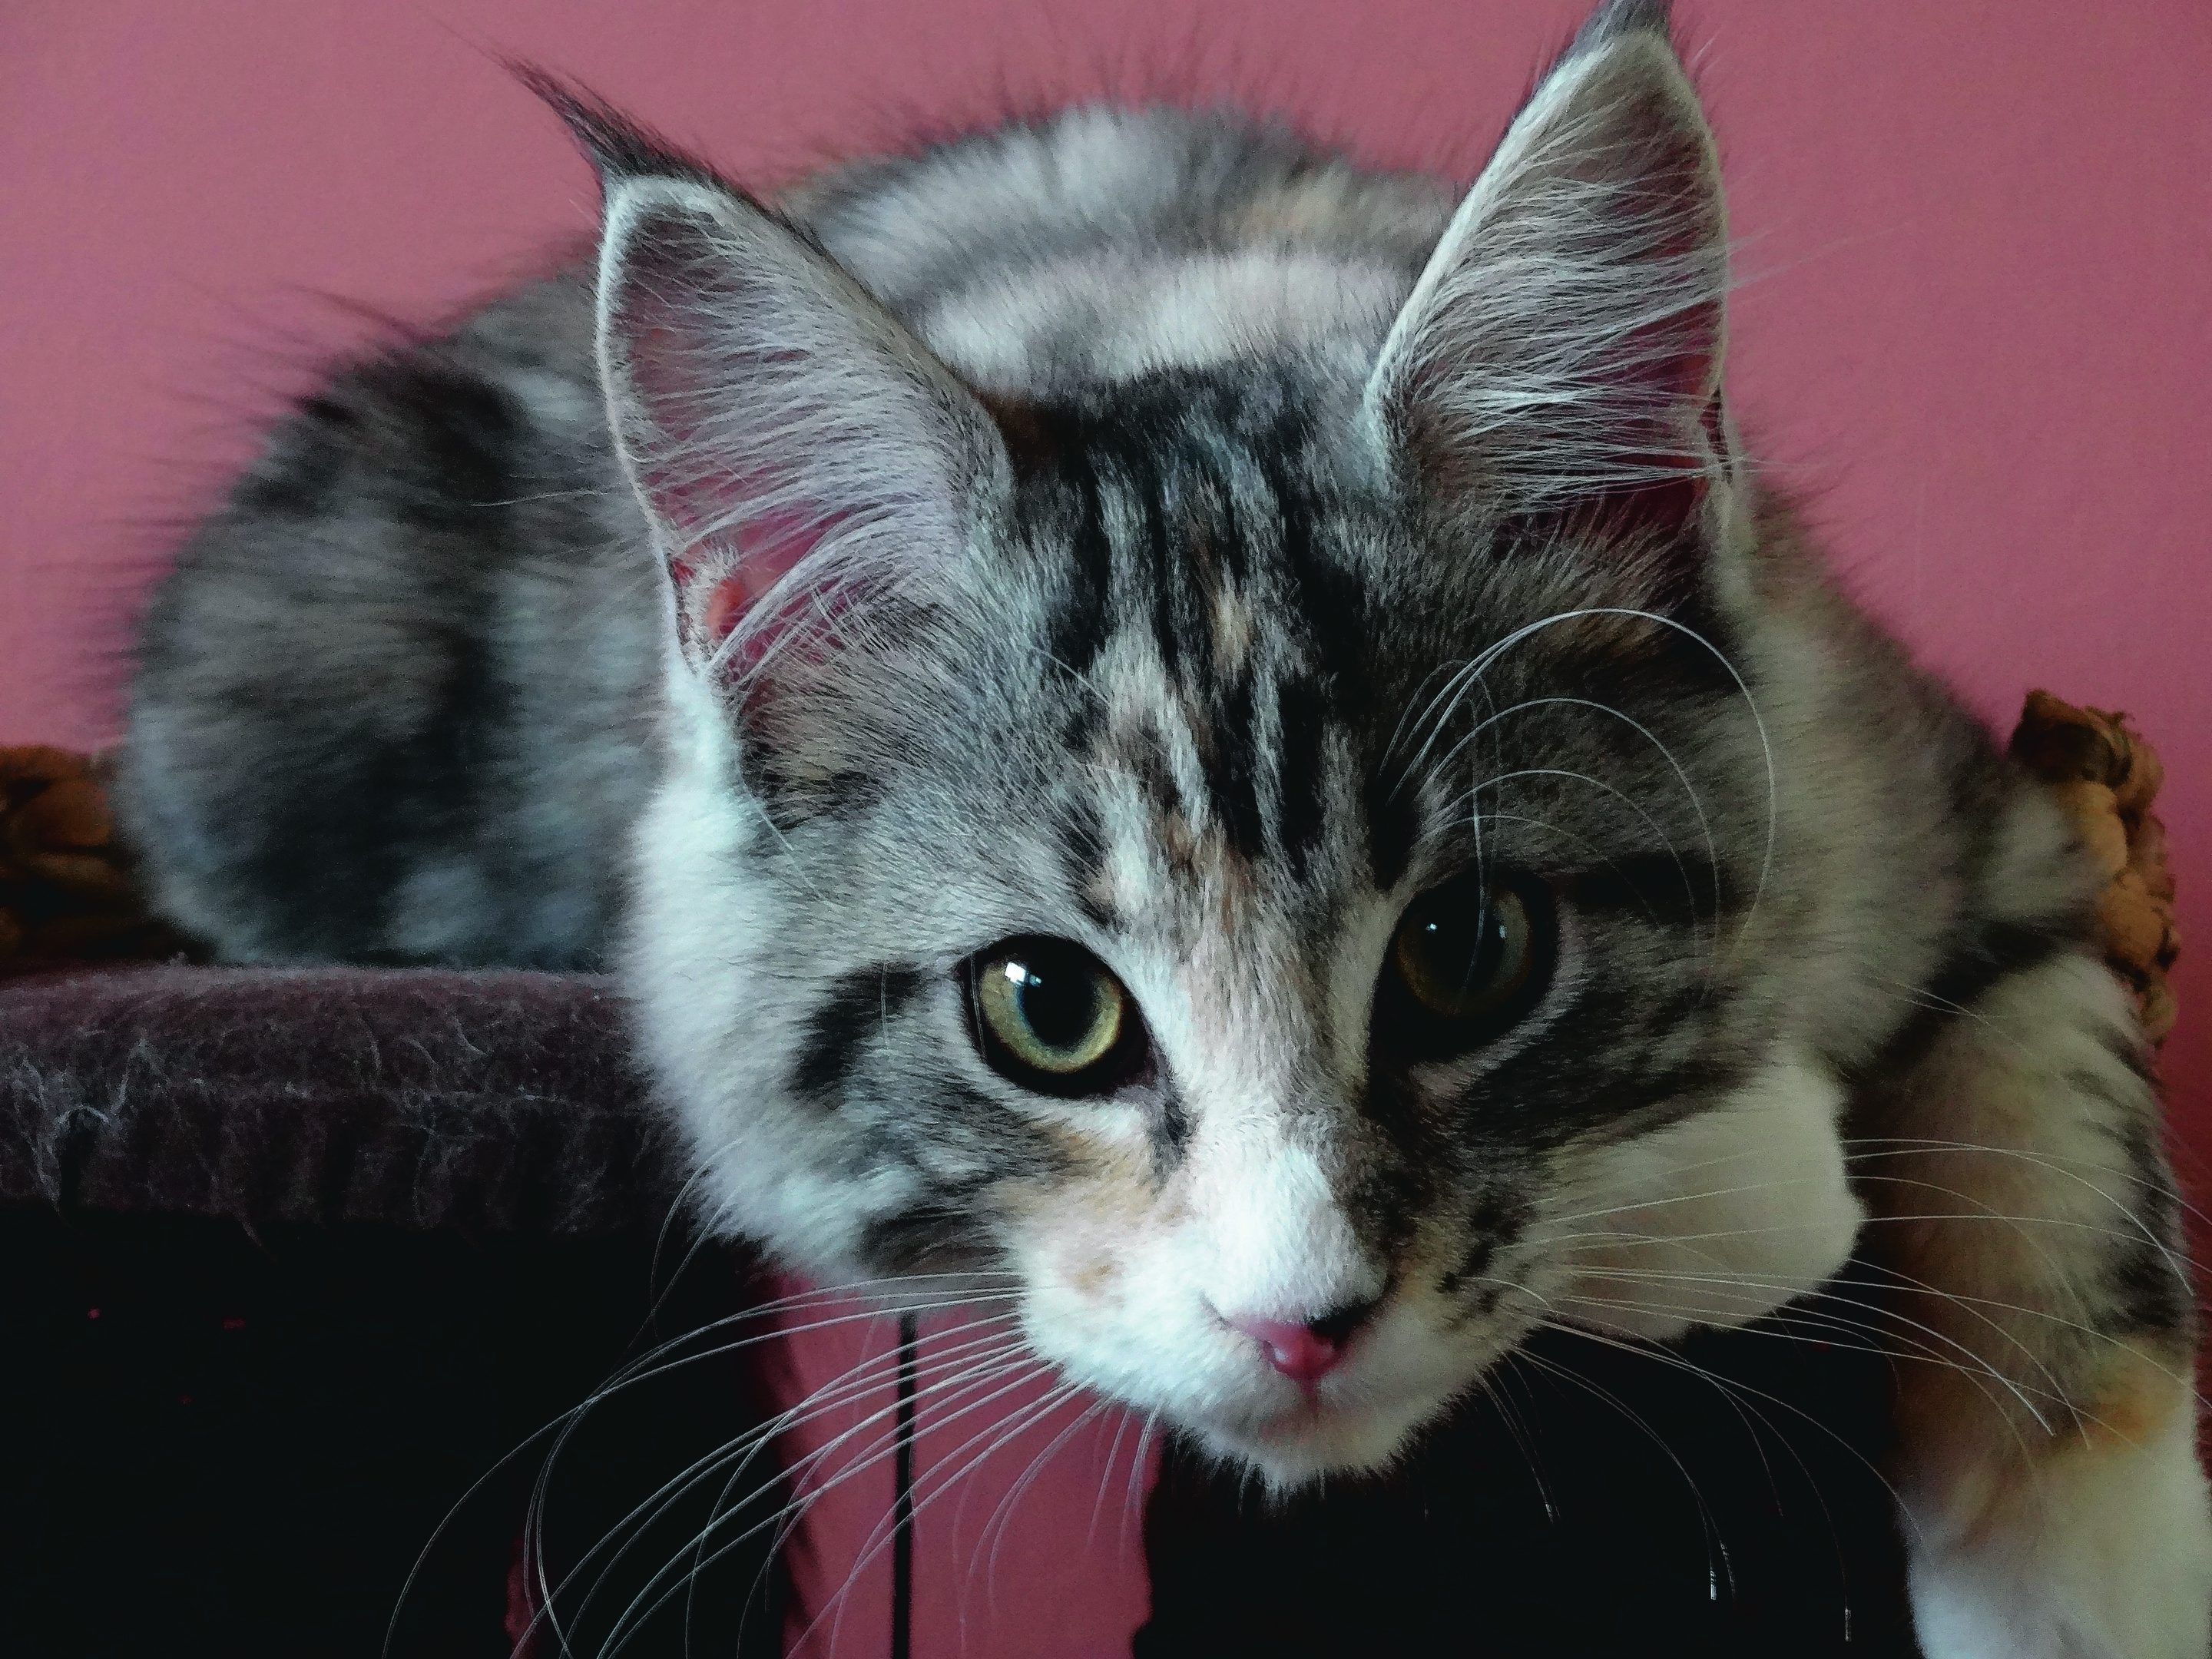 This 15-week-old Maine Coon kitten, Amber, lives with Kat and Kev in Boddam. Amber is our winner this week.